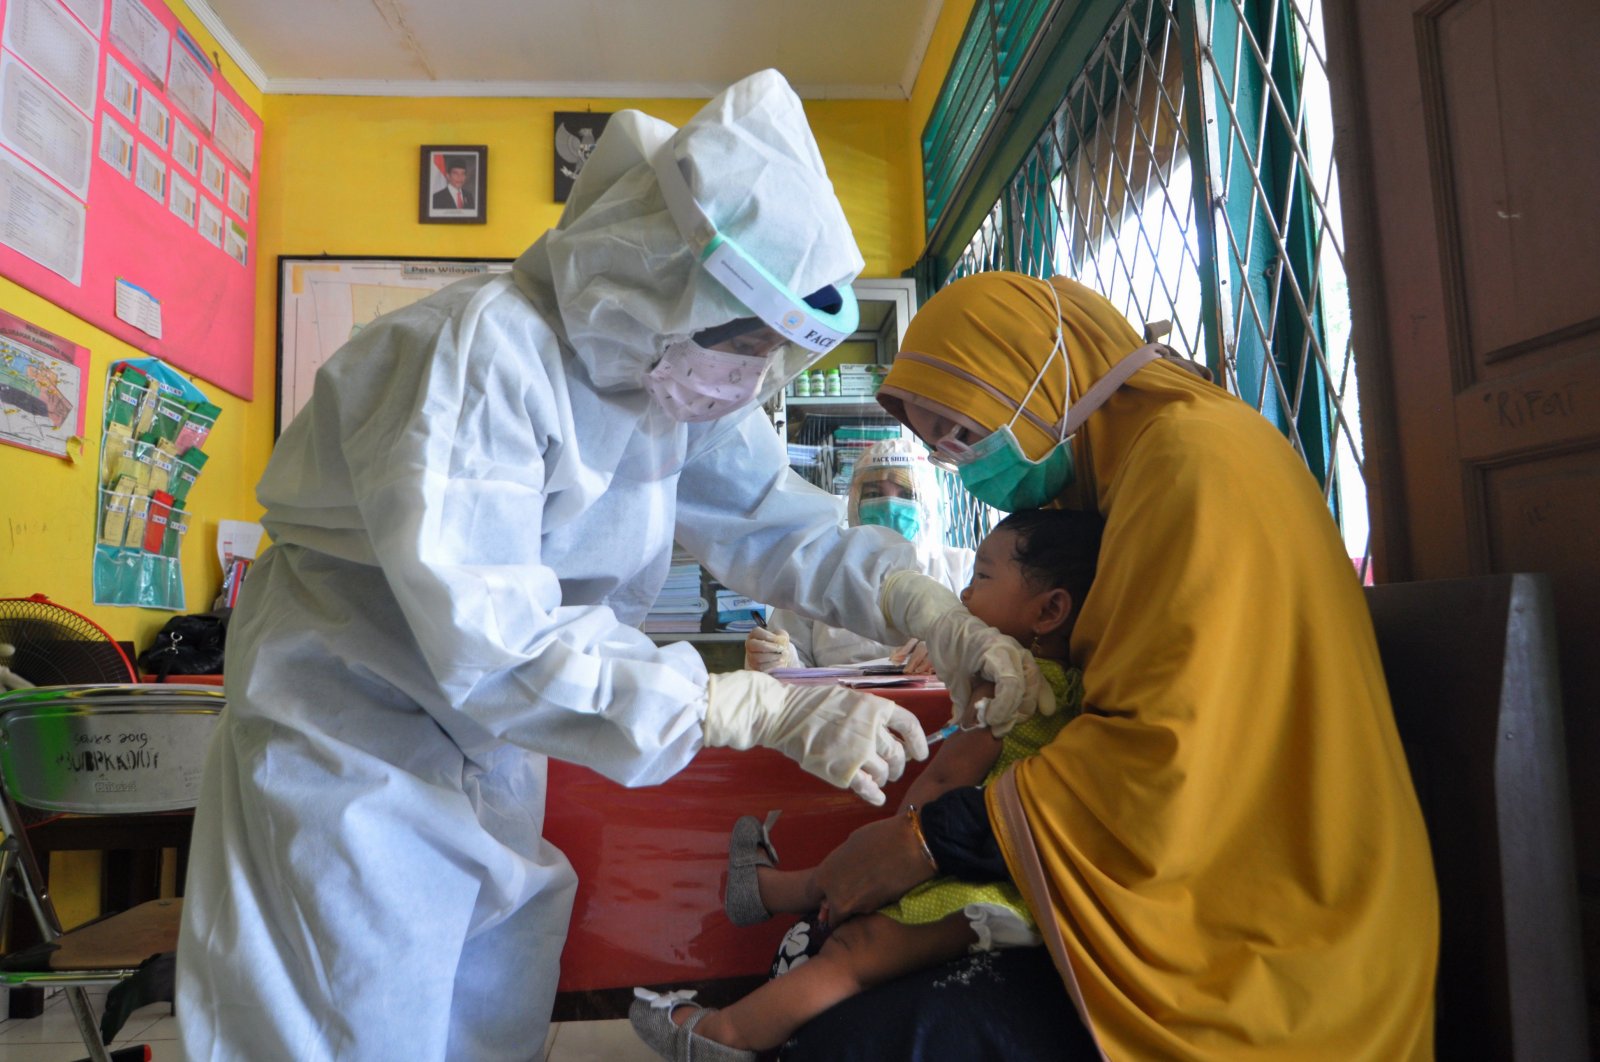 Nurses wearing protective gear give an injection of a vaccine for measles to a child at a health center in Palu, May 12, 2020. (AFP Photo)